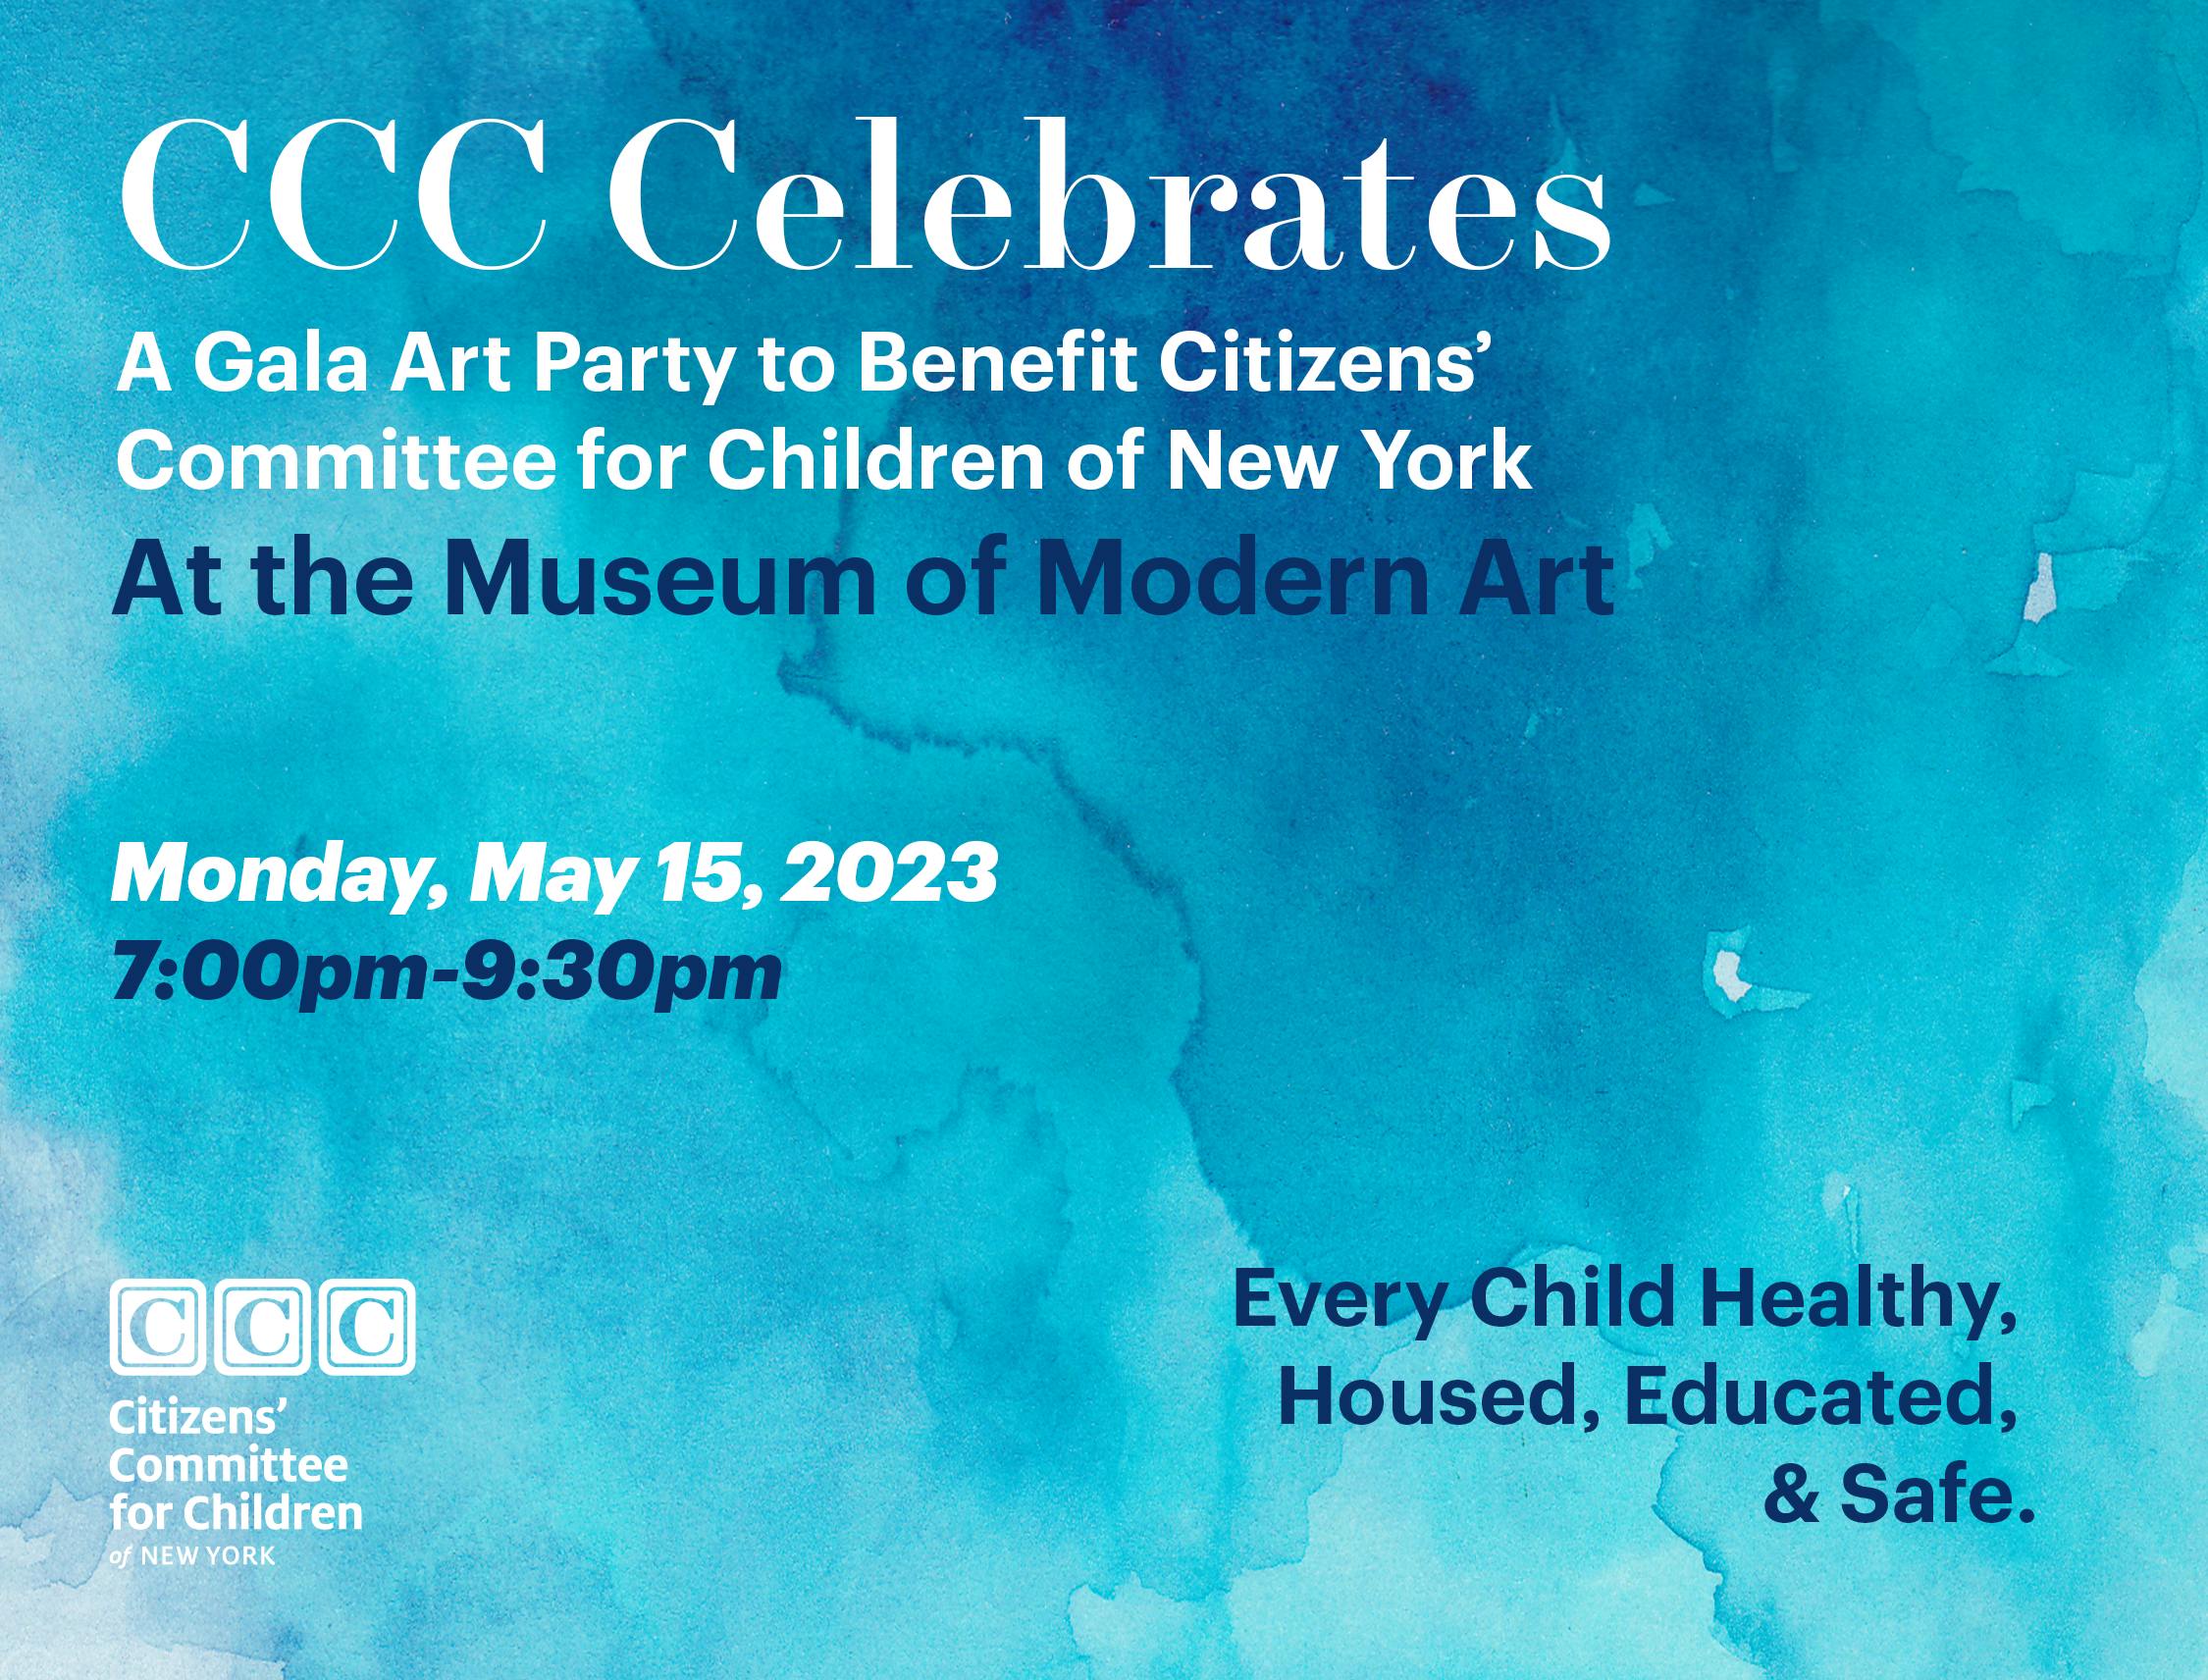 CCC Celebrates: a gala event at MoMA on Monday, May 15, 2023